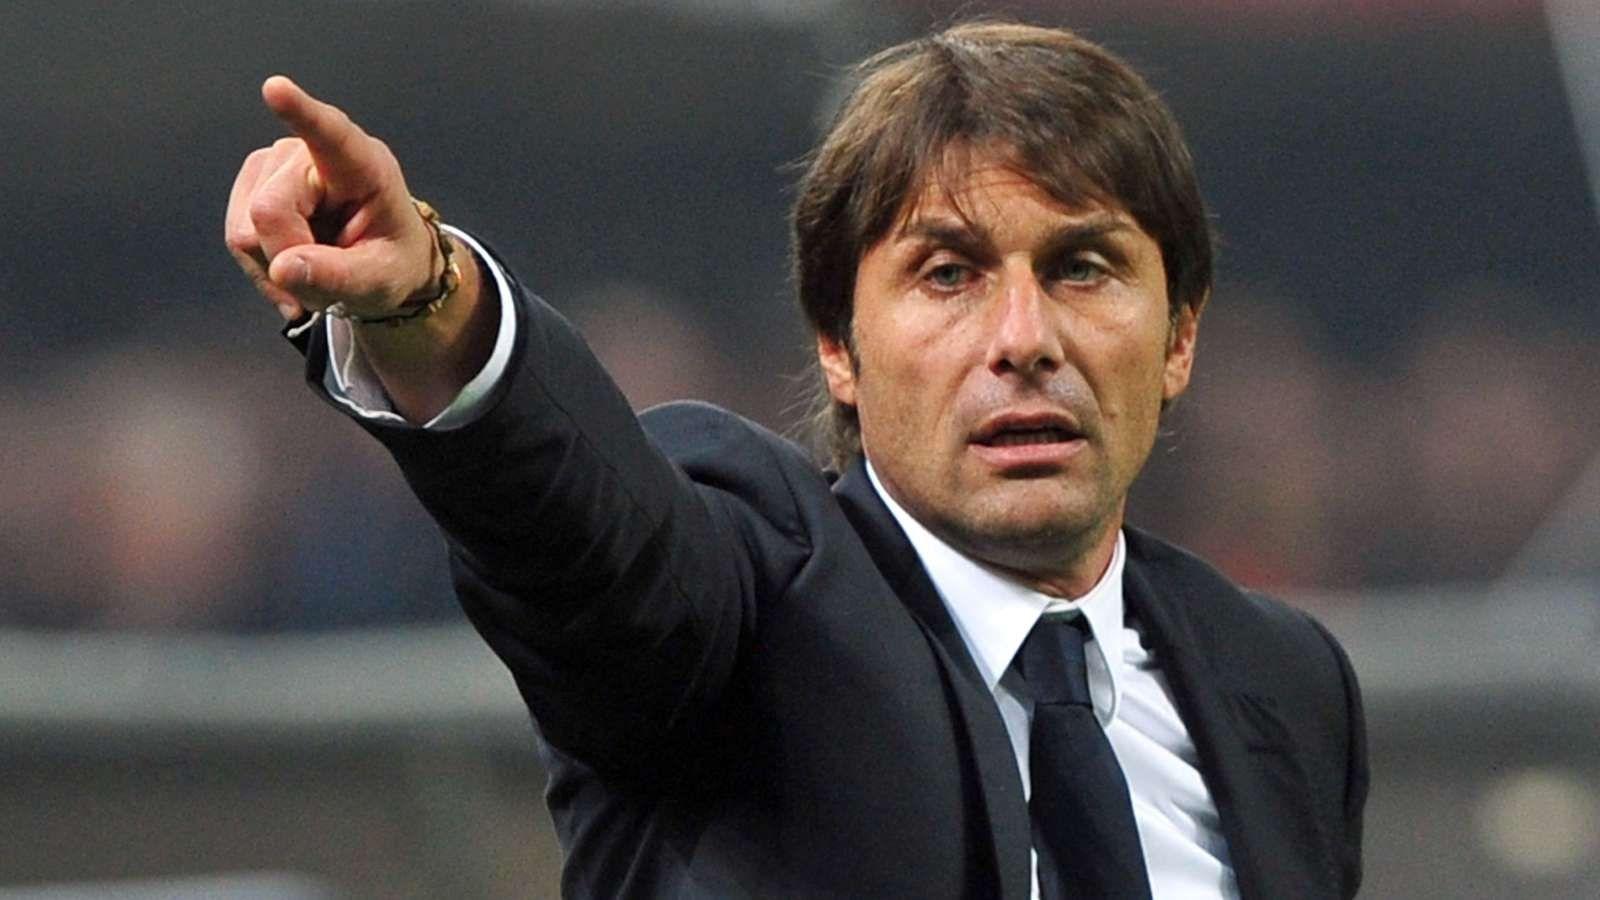 Antonio Conte Coached Chelsea&;s Official Season From 2016 to 2017